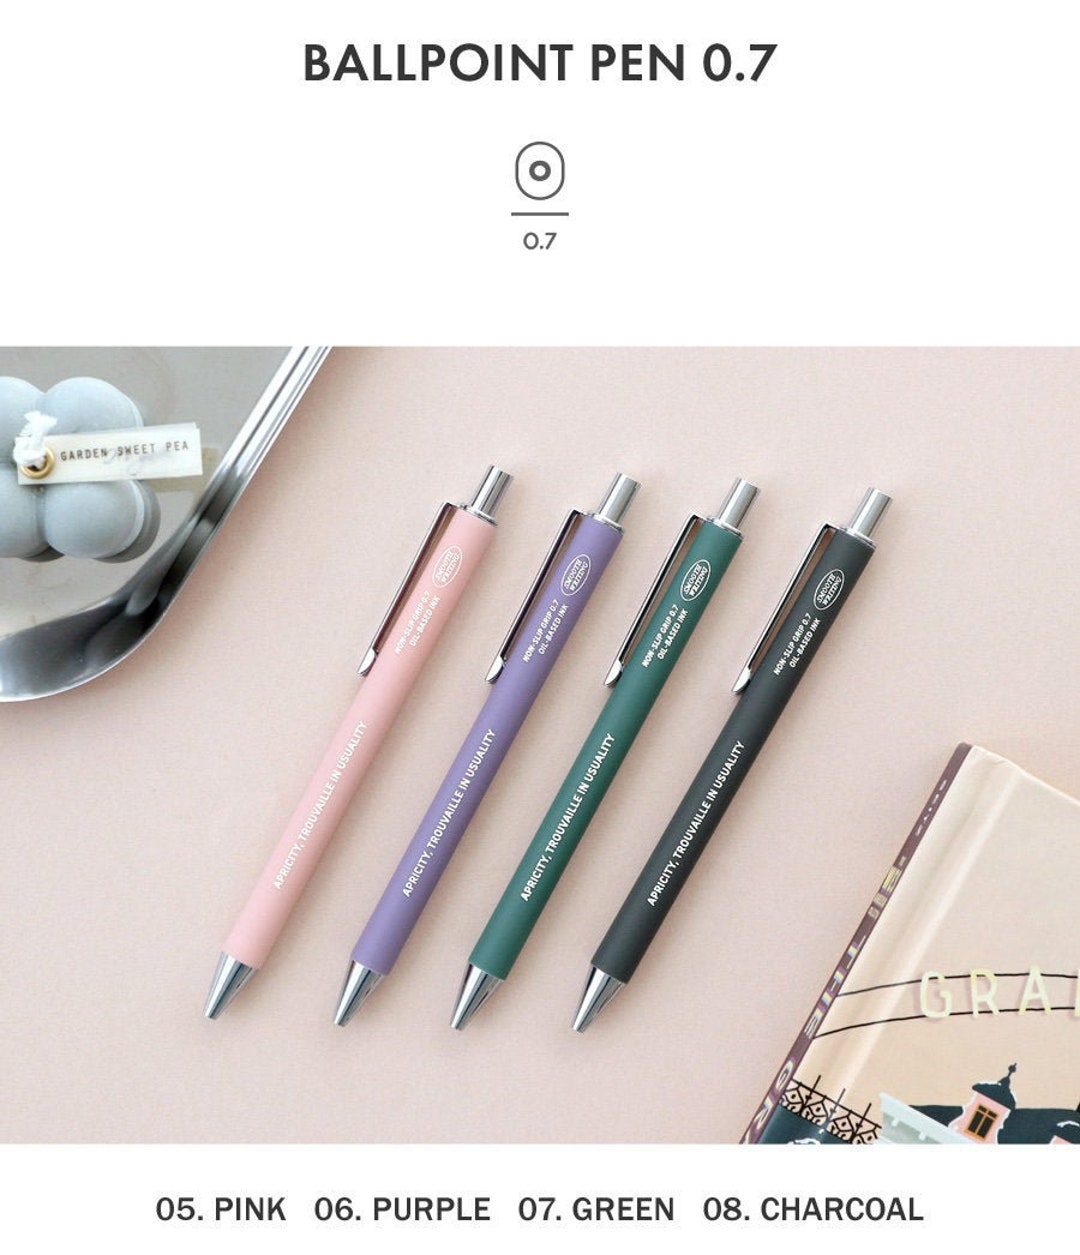 6 PCS Colored Gel Pens, Pastel Quick Dry Ink Pens, 0.5mm Fine Point Smooth  Writing Pens, Aesthetic Pens, Cute Japanese Retractable Journal for Writing